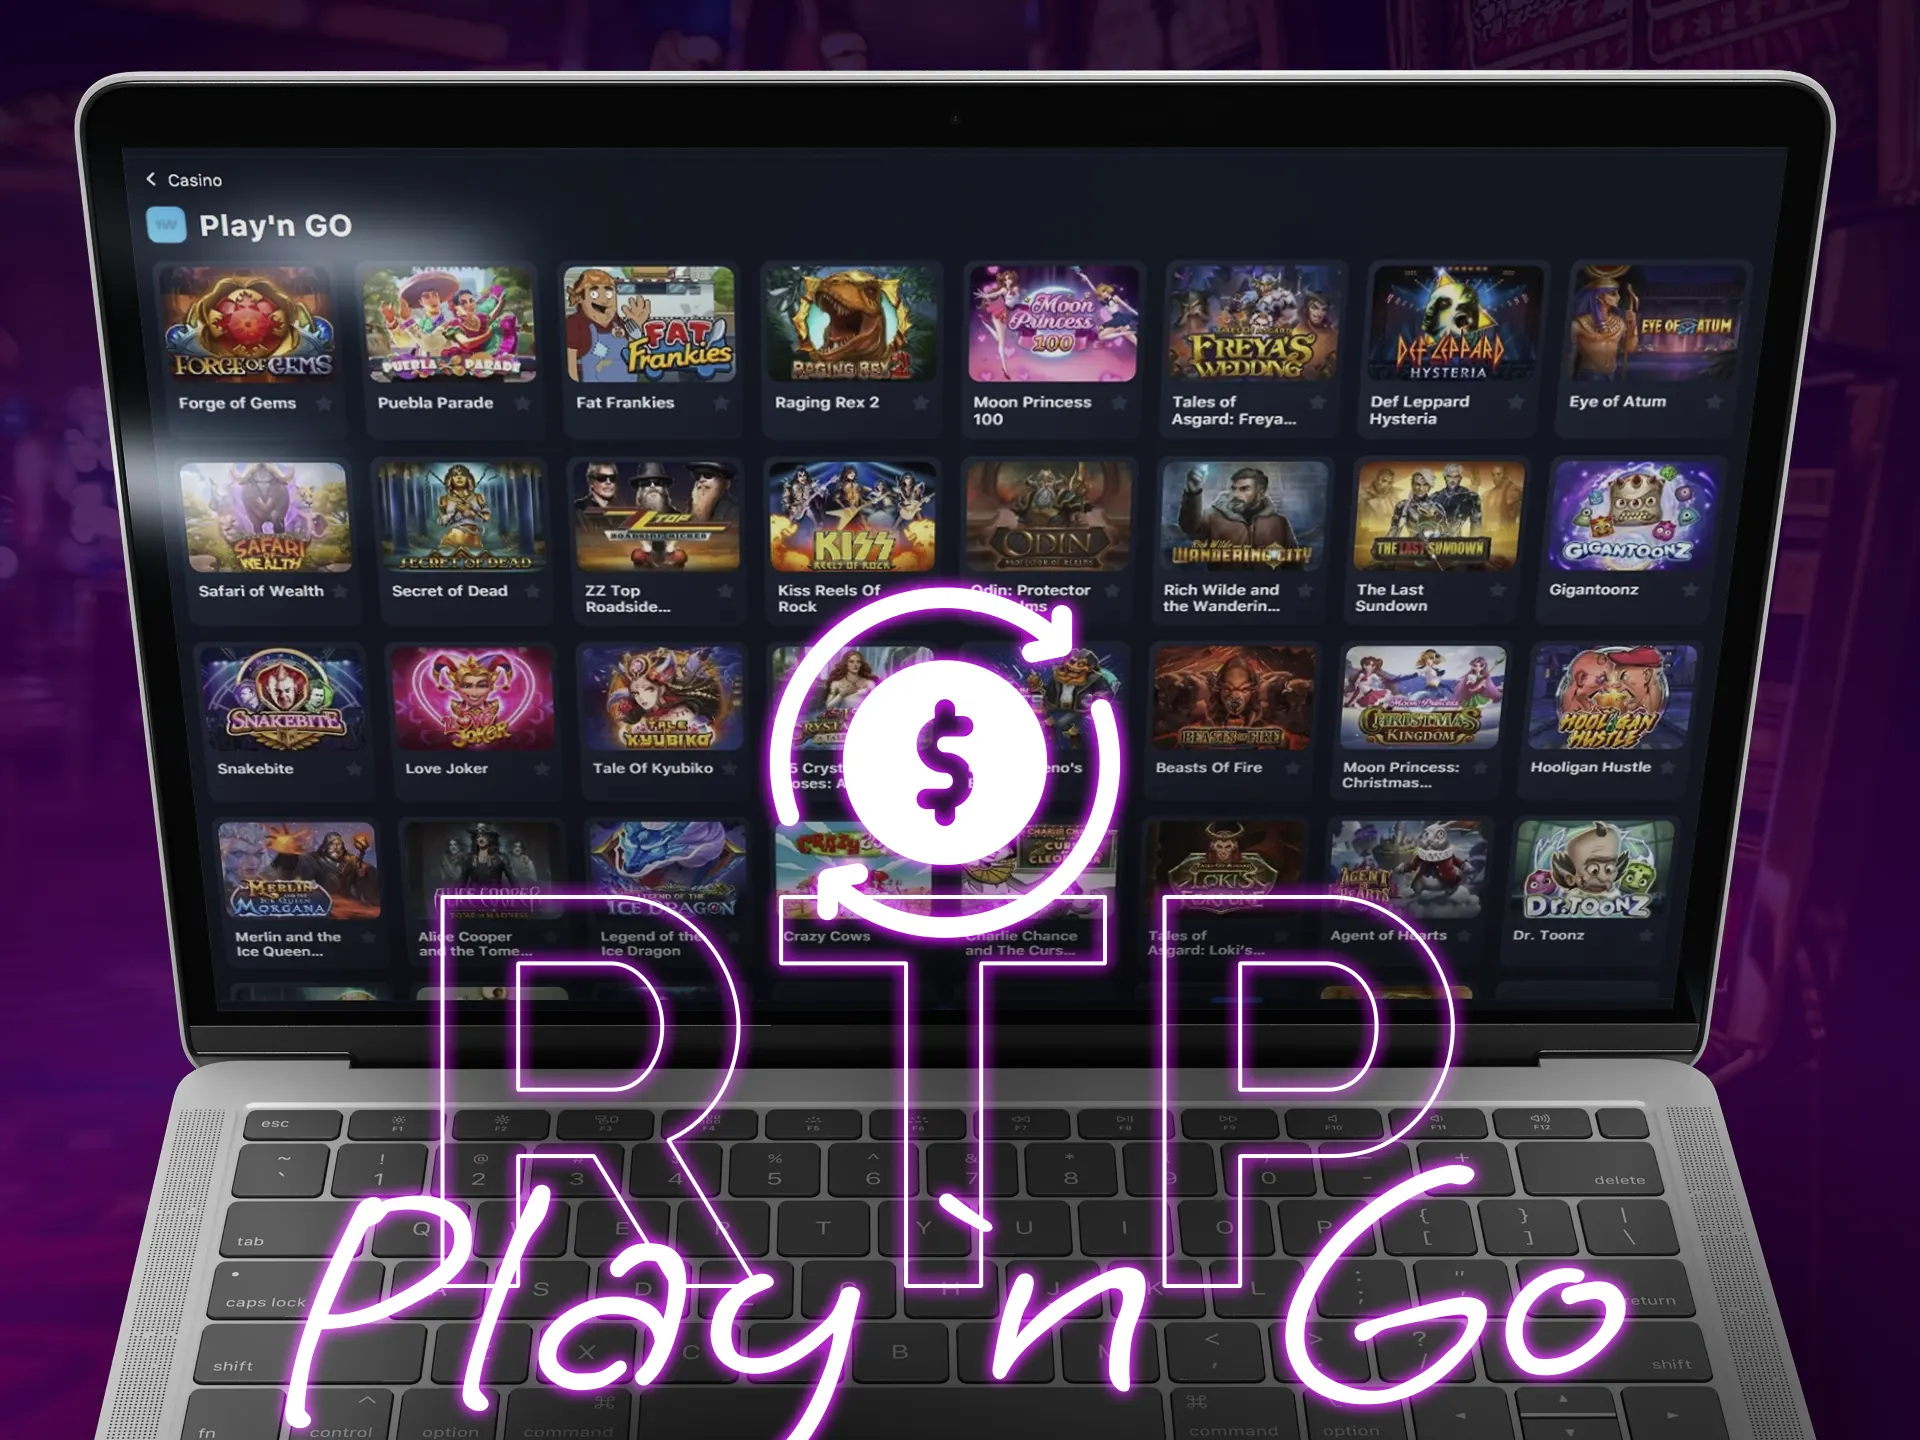 RTP in Play'n Go games is often 94% or higher.